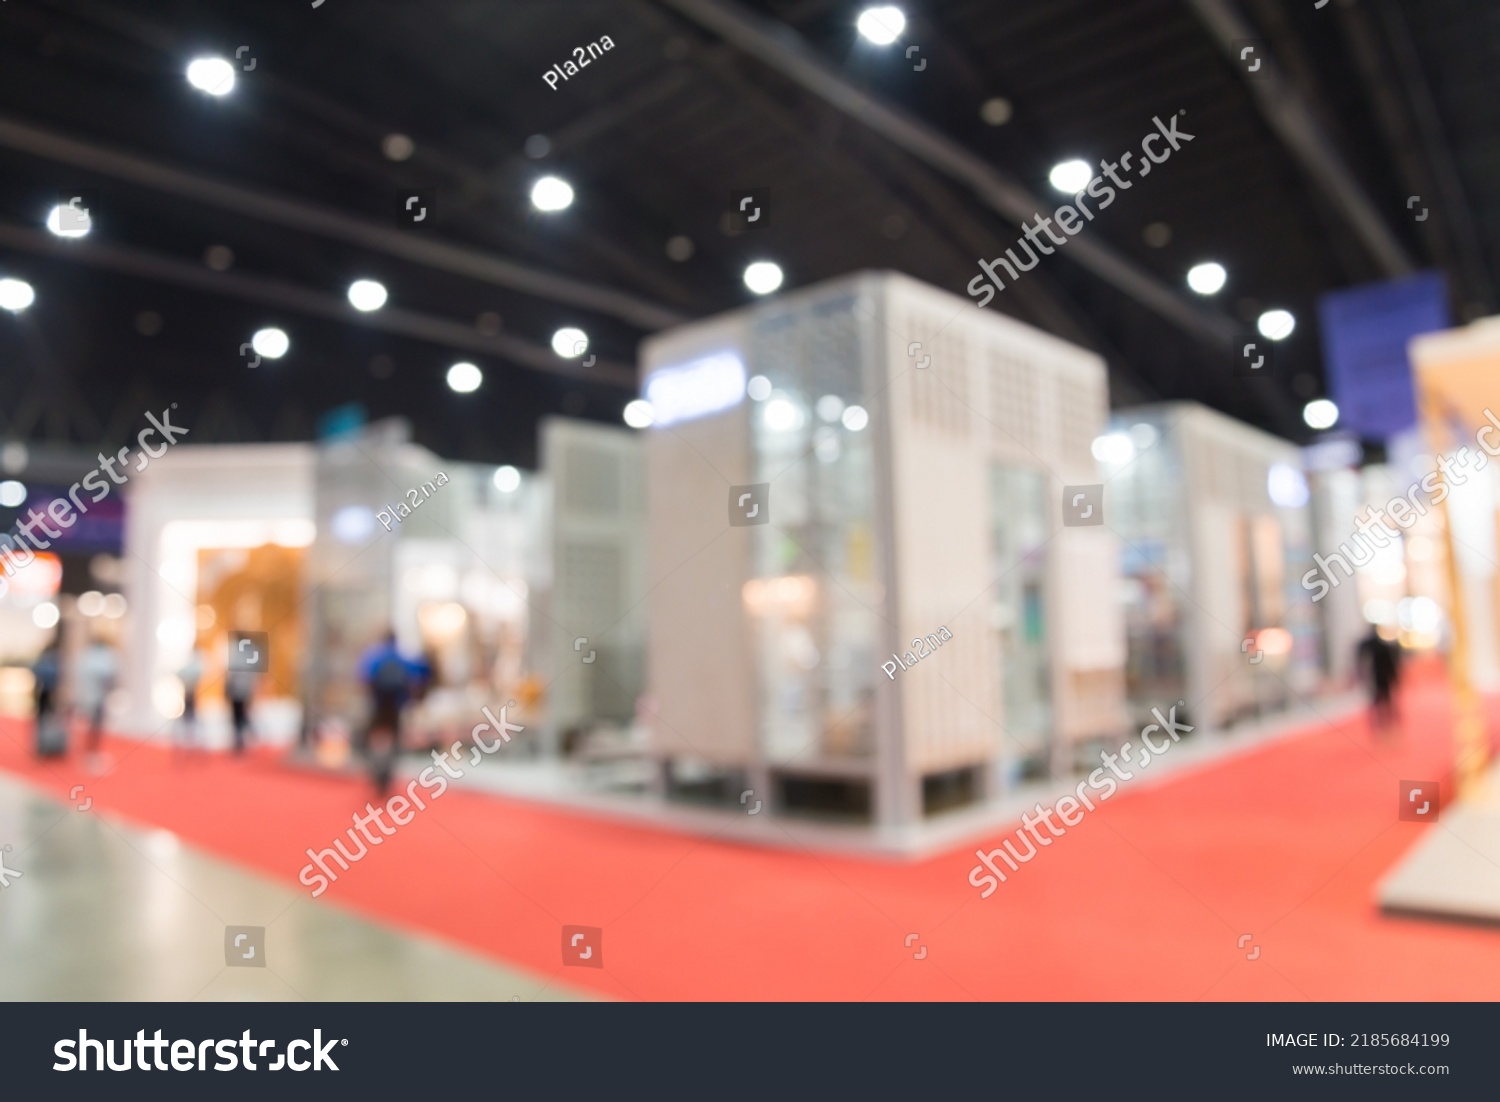 Abstract blur people in exhibition hall event trade show expo background. Home furniture fair expo, business marketing and event fair organizer concept. #2185684199